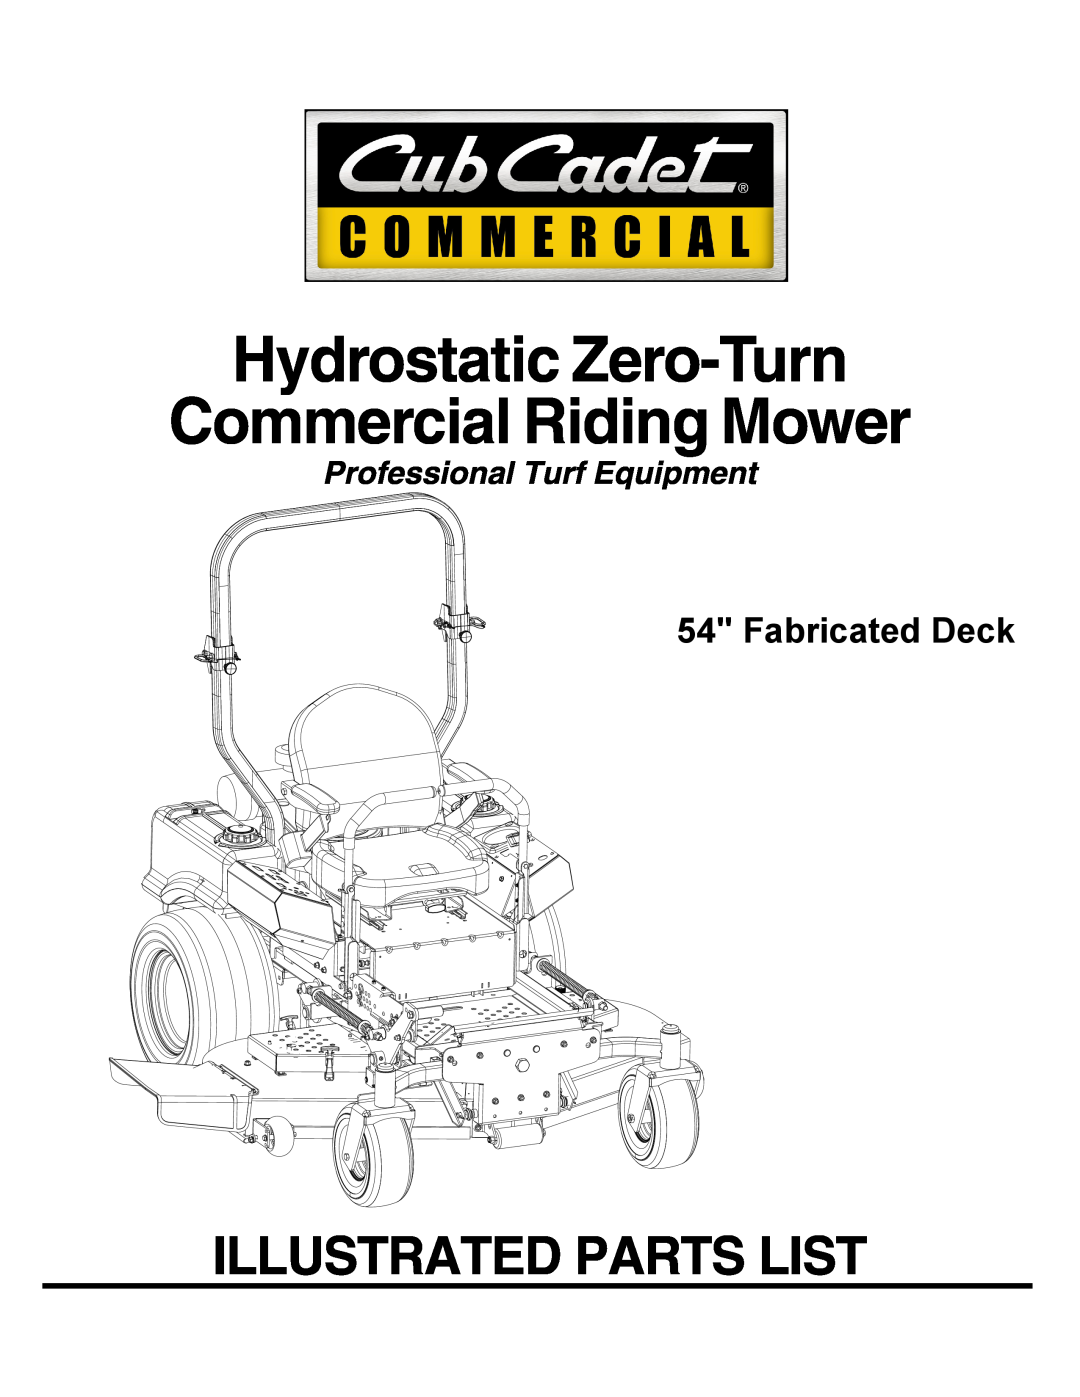 Cub Cadet 53AH8CT4050 manual Hydrostatic Zero-Turn Commercial Riding Mower, Illustrated Parts List, Fabricated Deck 